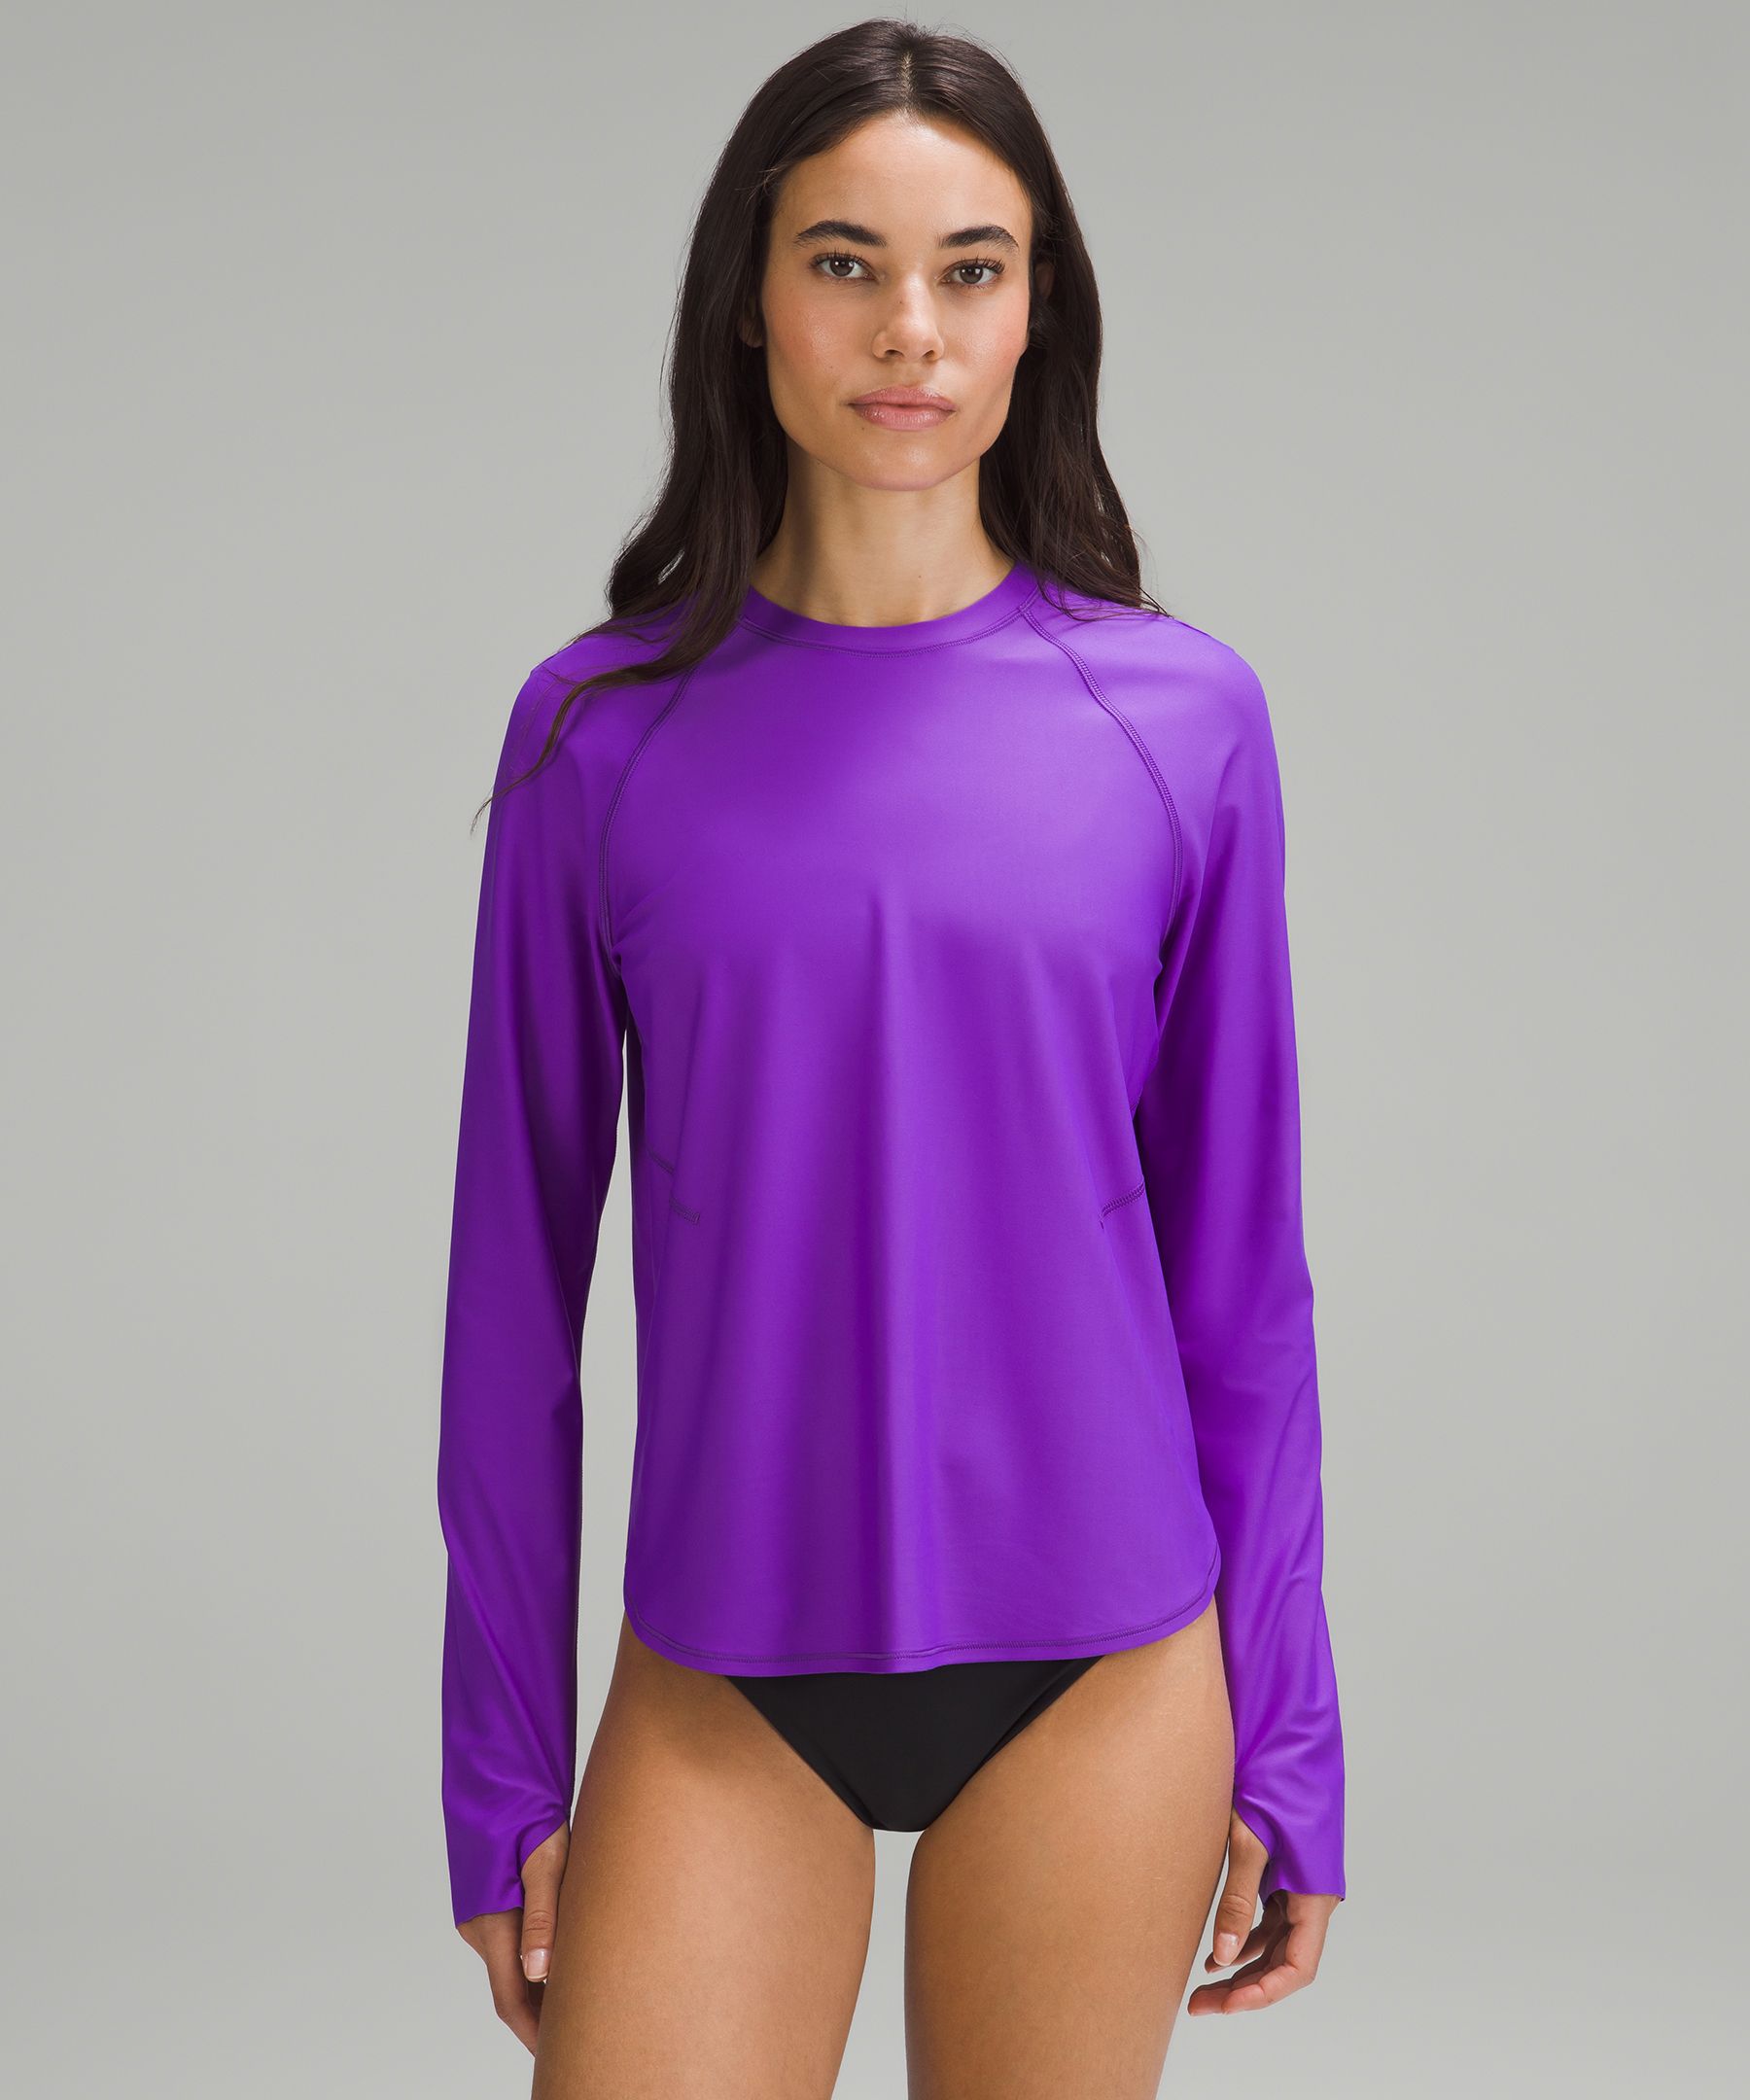 Waterside Relaxed UV Protection Long-Sleeve Shirt, Women's Swimsuits